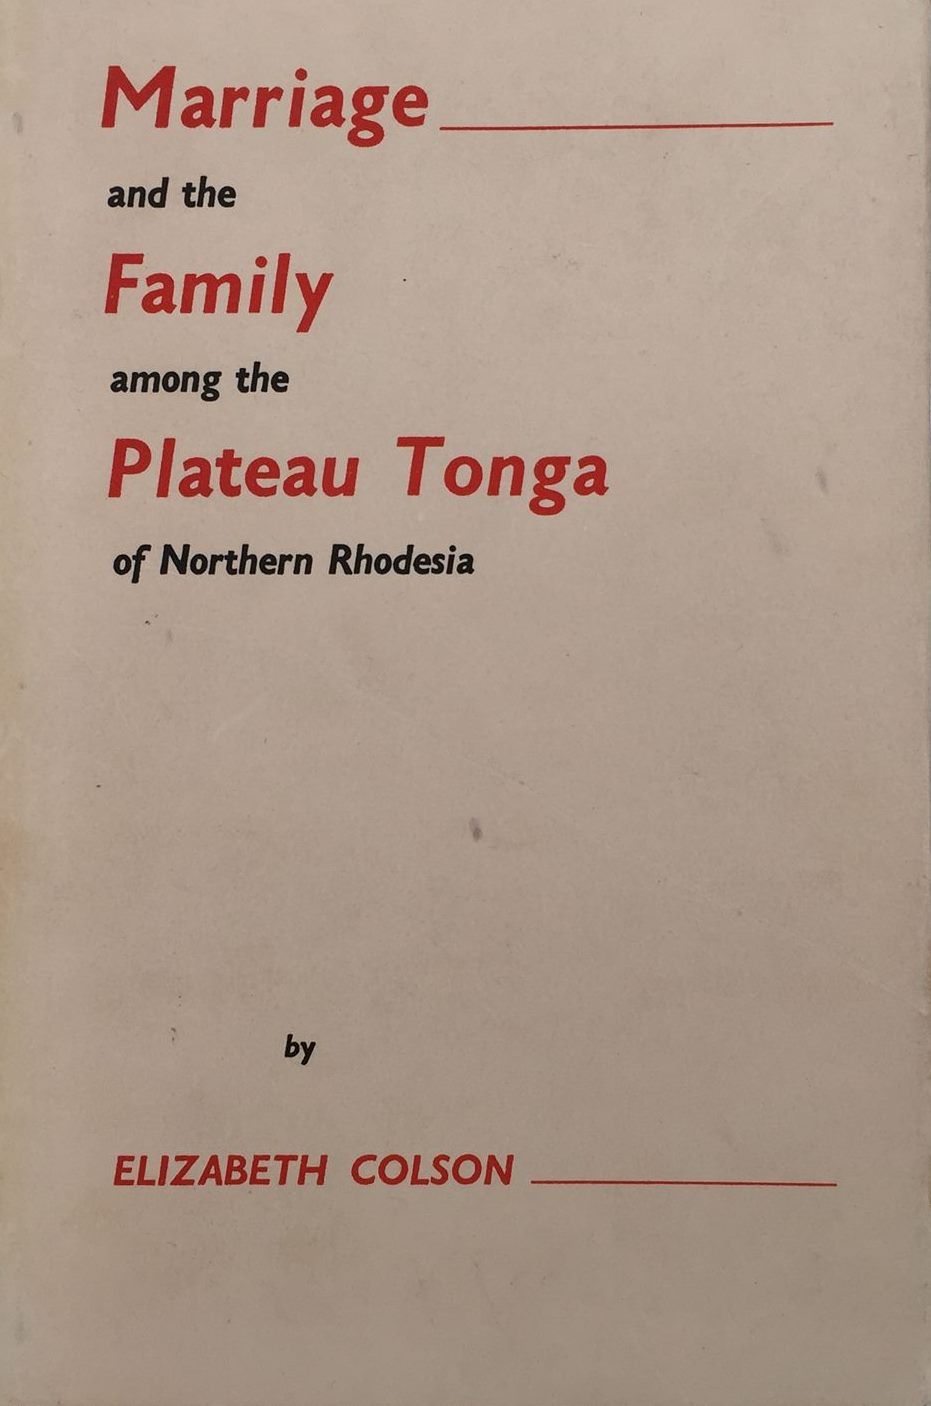 Marriage & The Family Among The PLATEAU TONGA OF NORTHERN RHODESIA